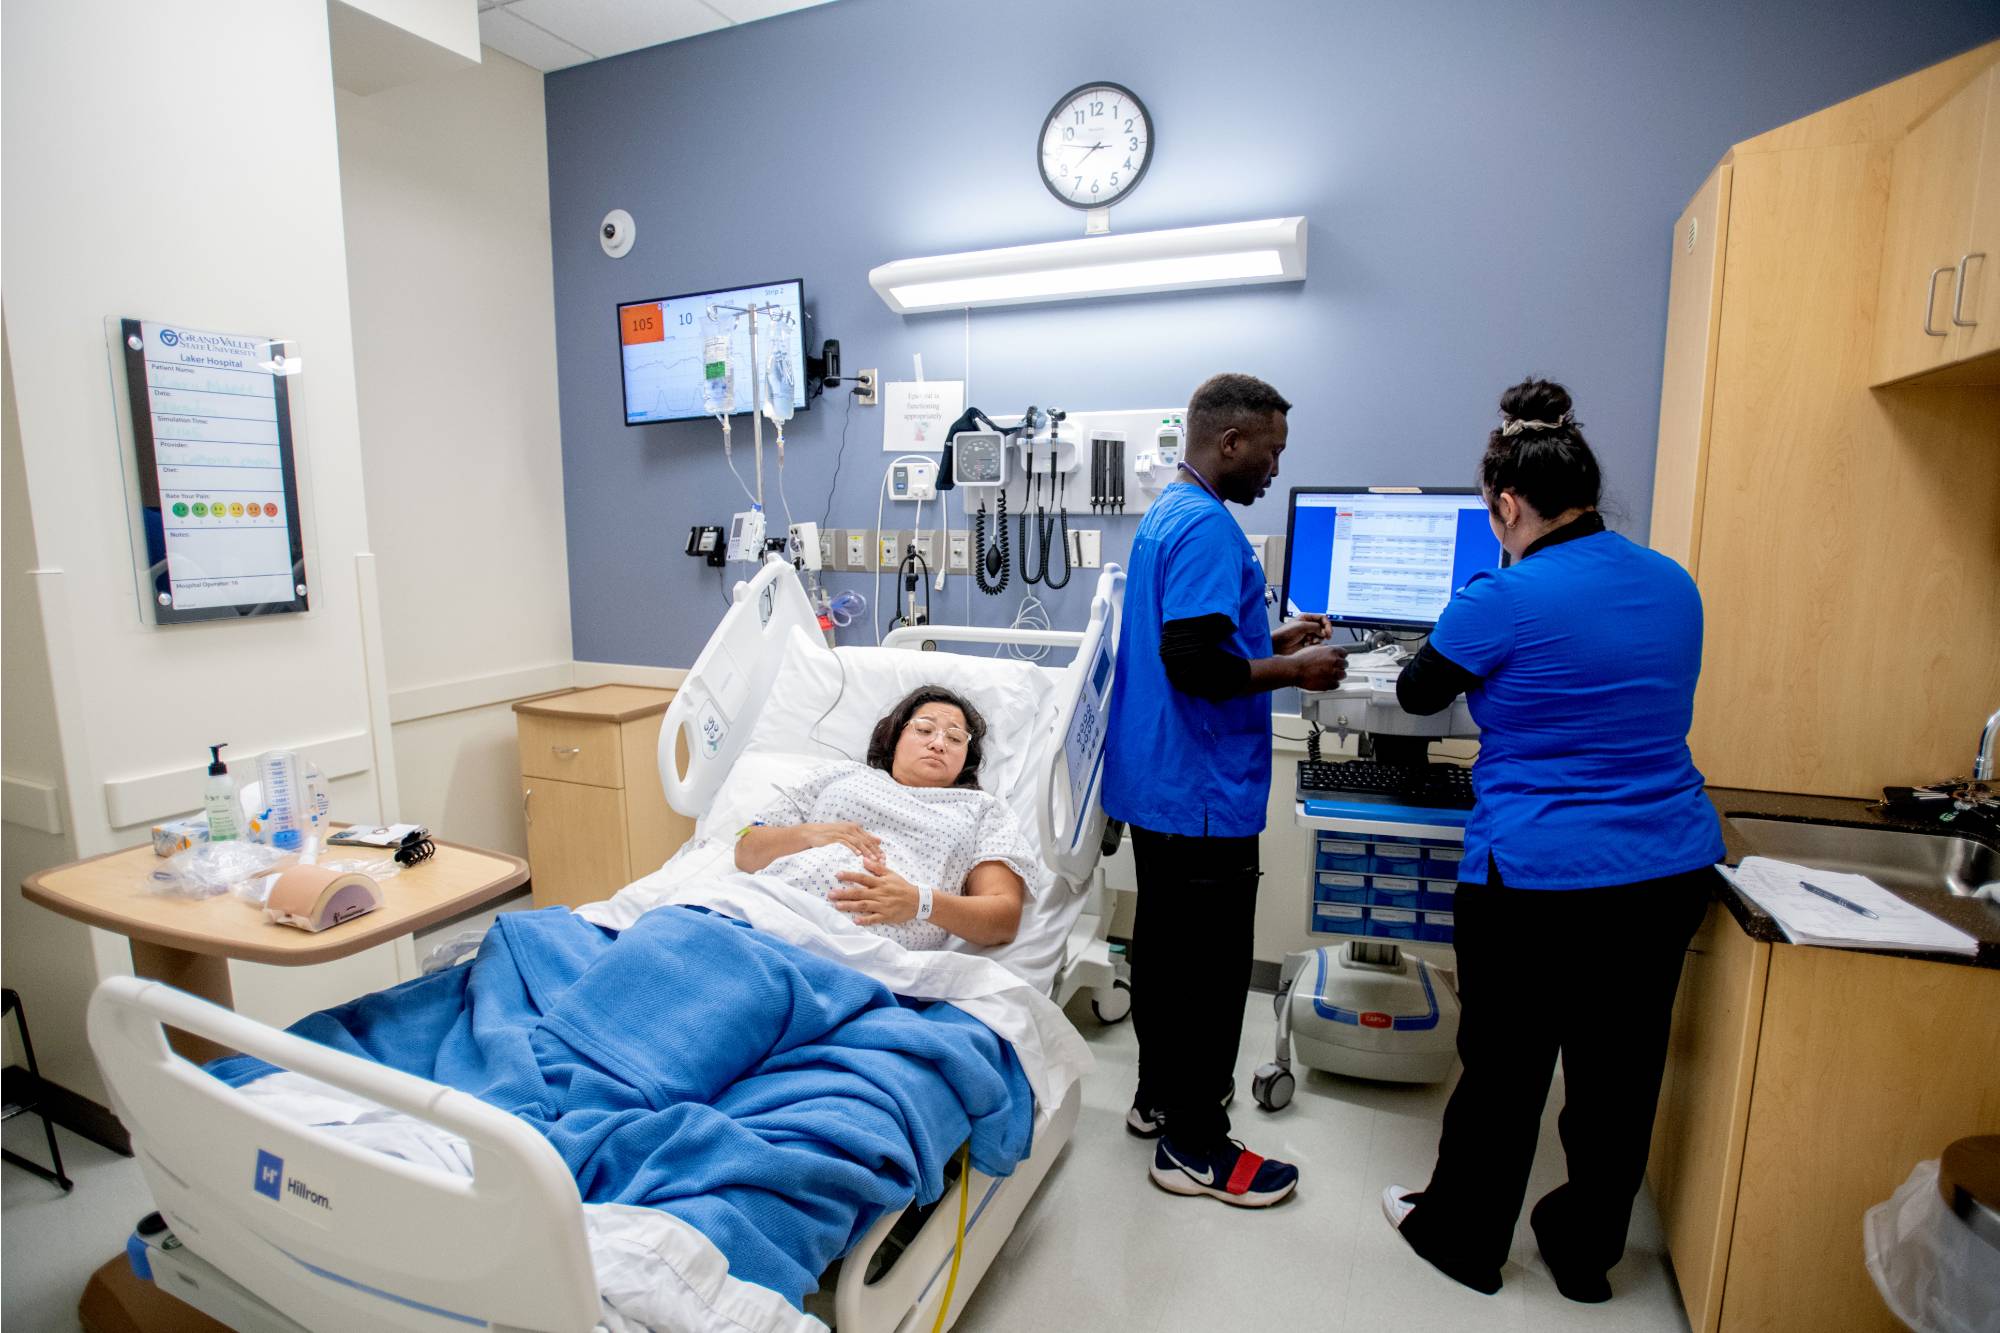 Students in a nursing lab